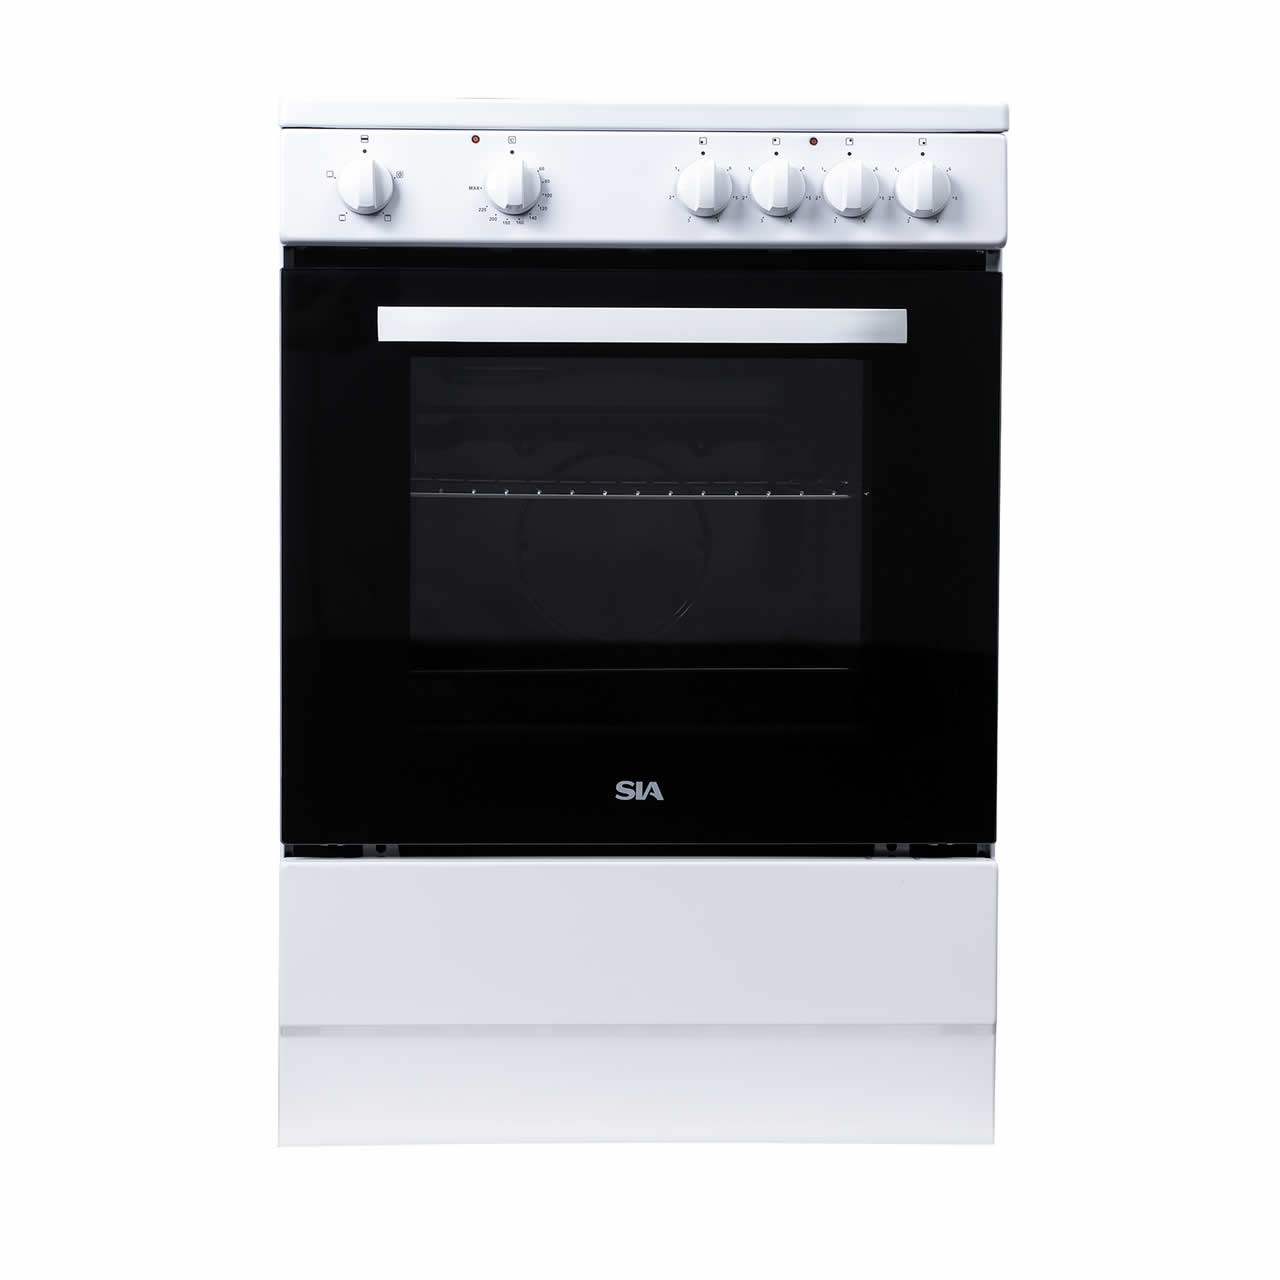 Sia 600mm Single Electric Cooker Solid Plate Hob White